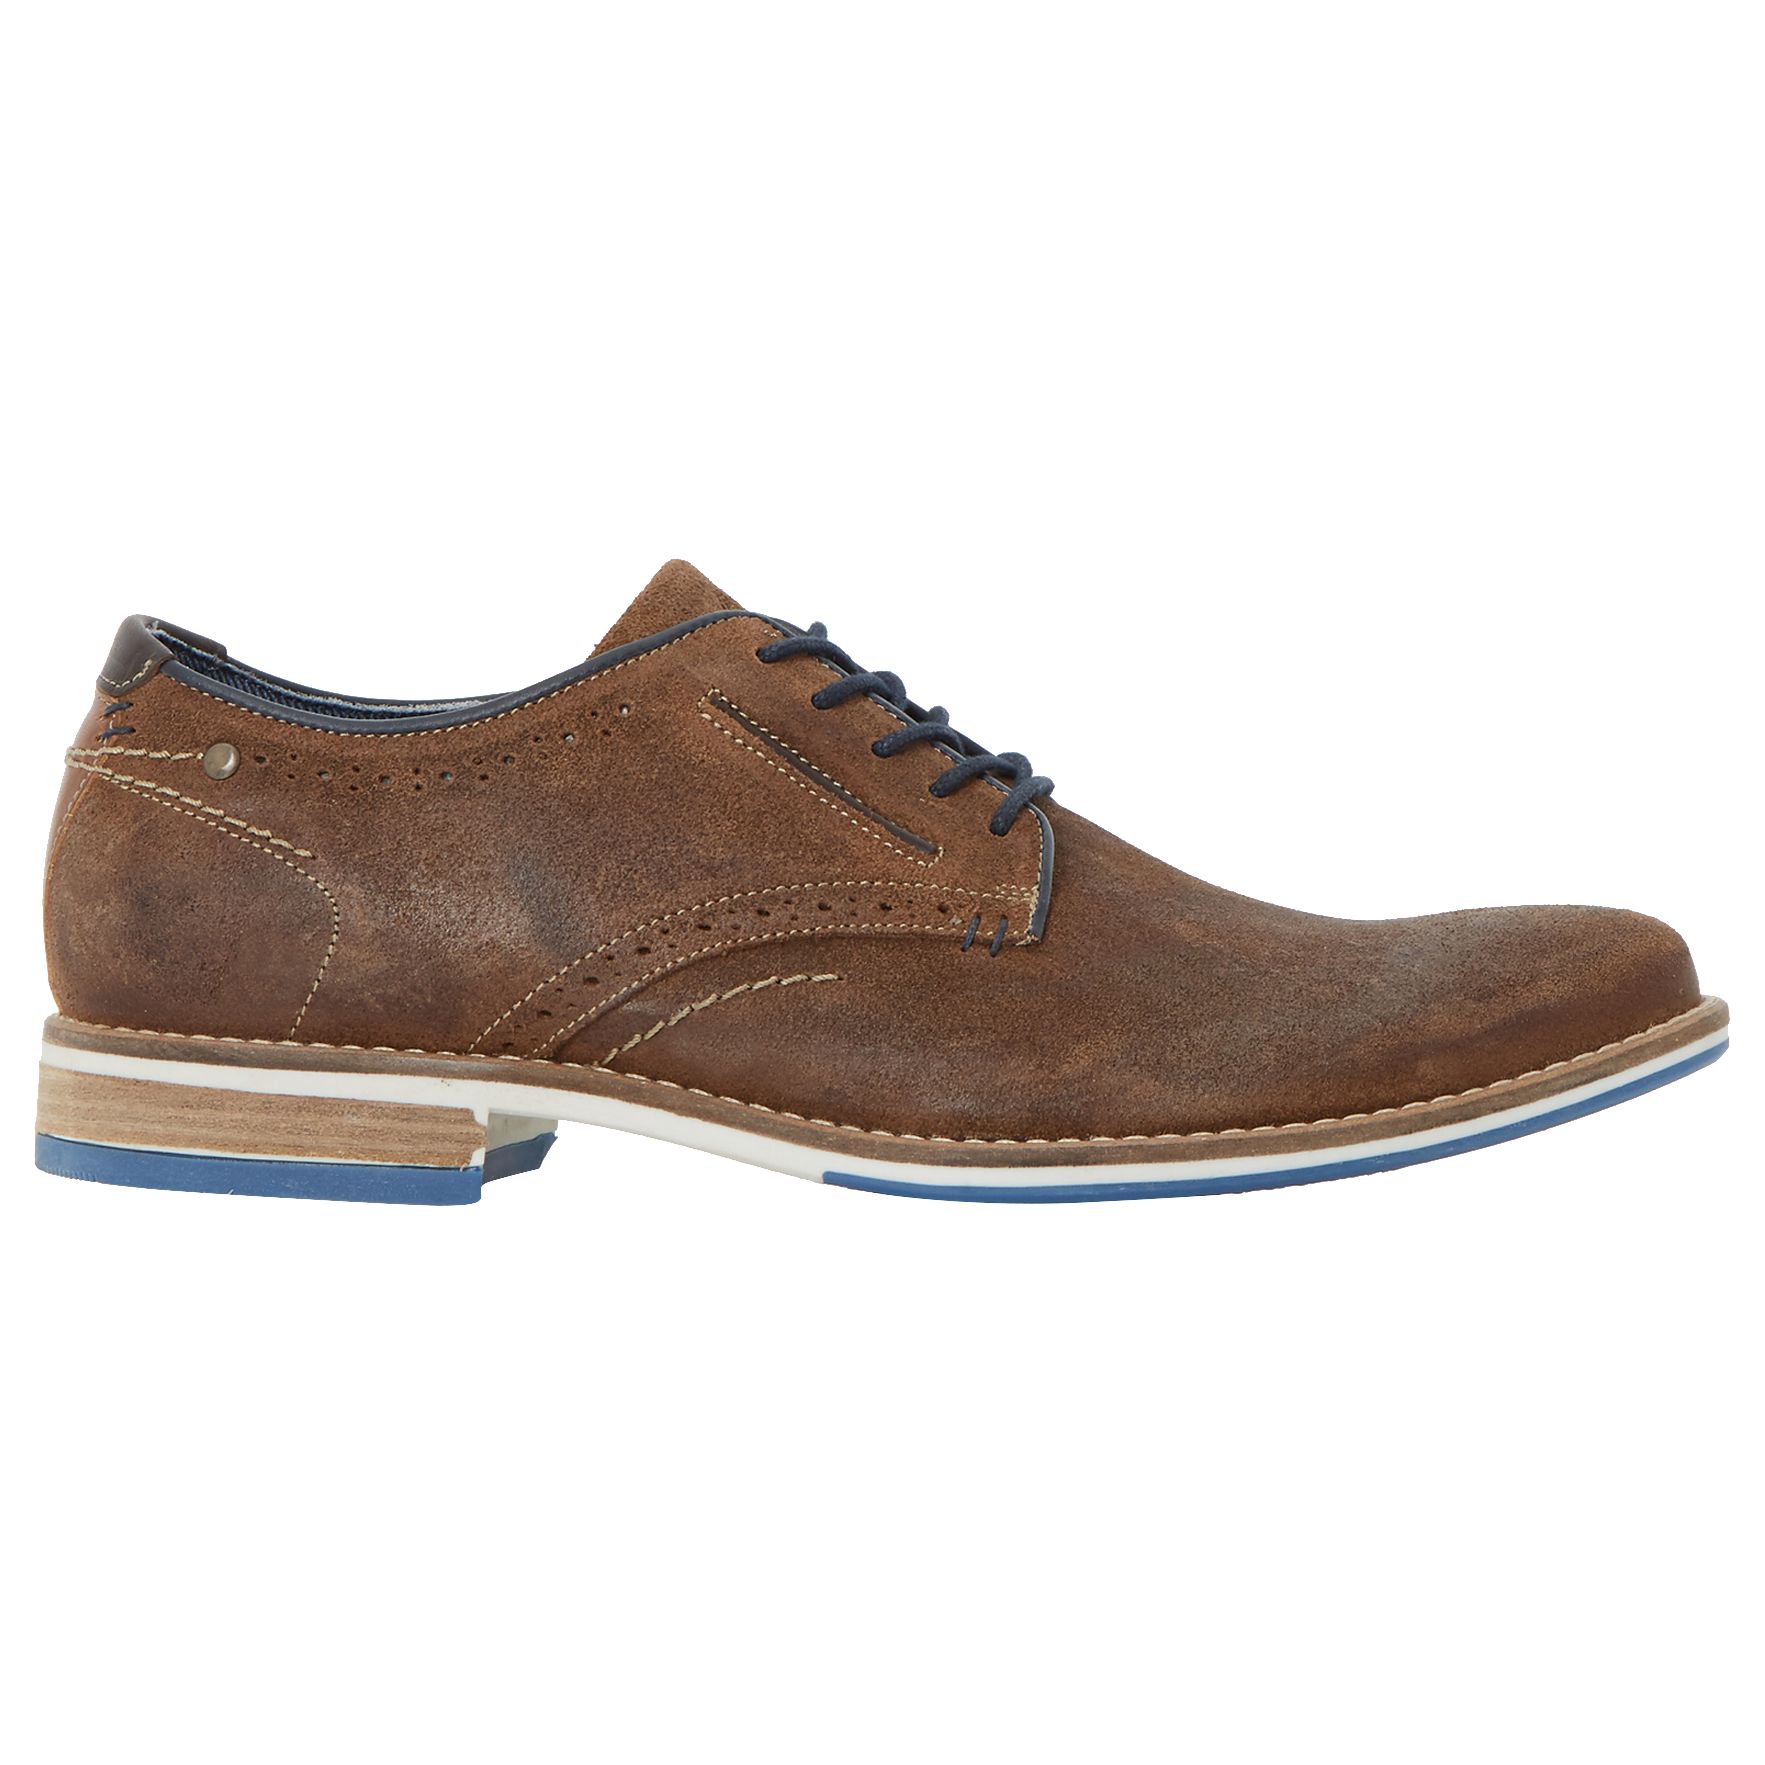 Dune Brewer Gibson Suede Shoes, Tan Suede, 11